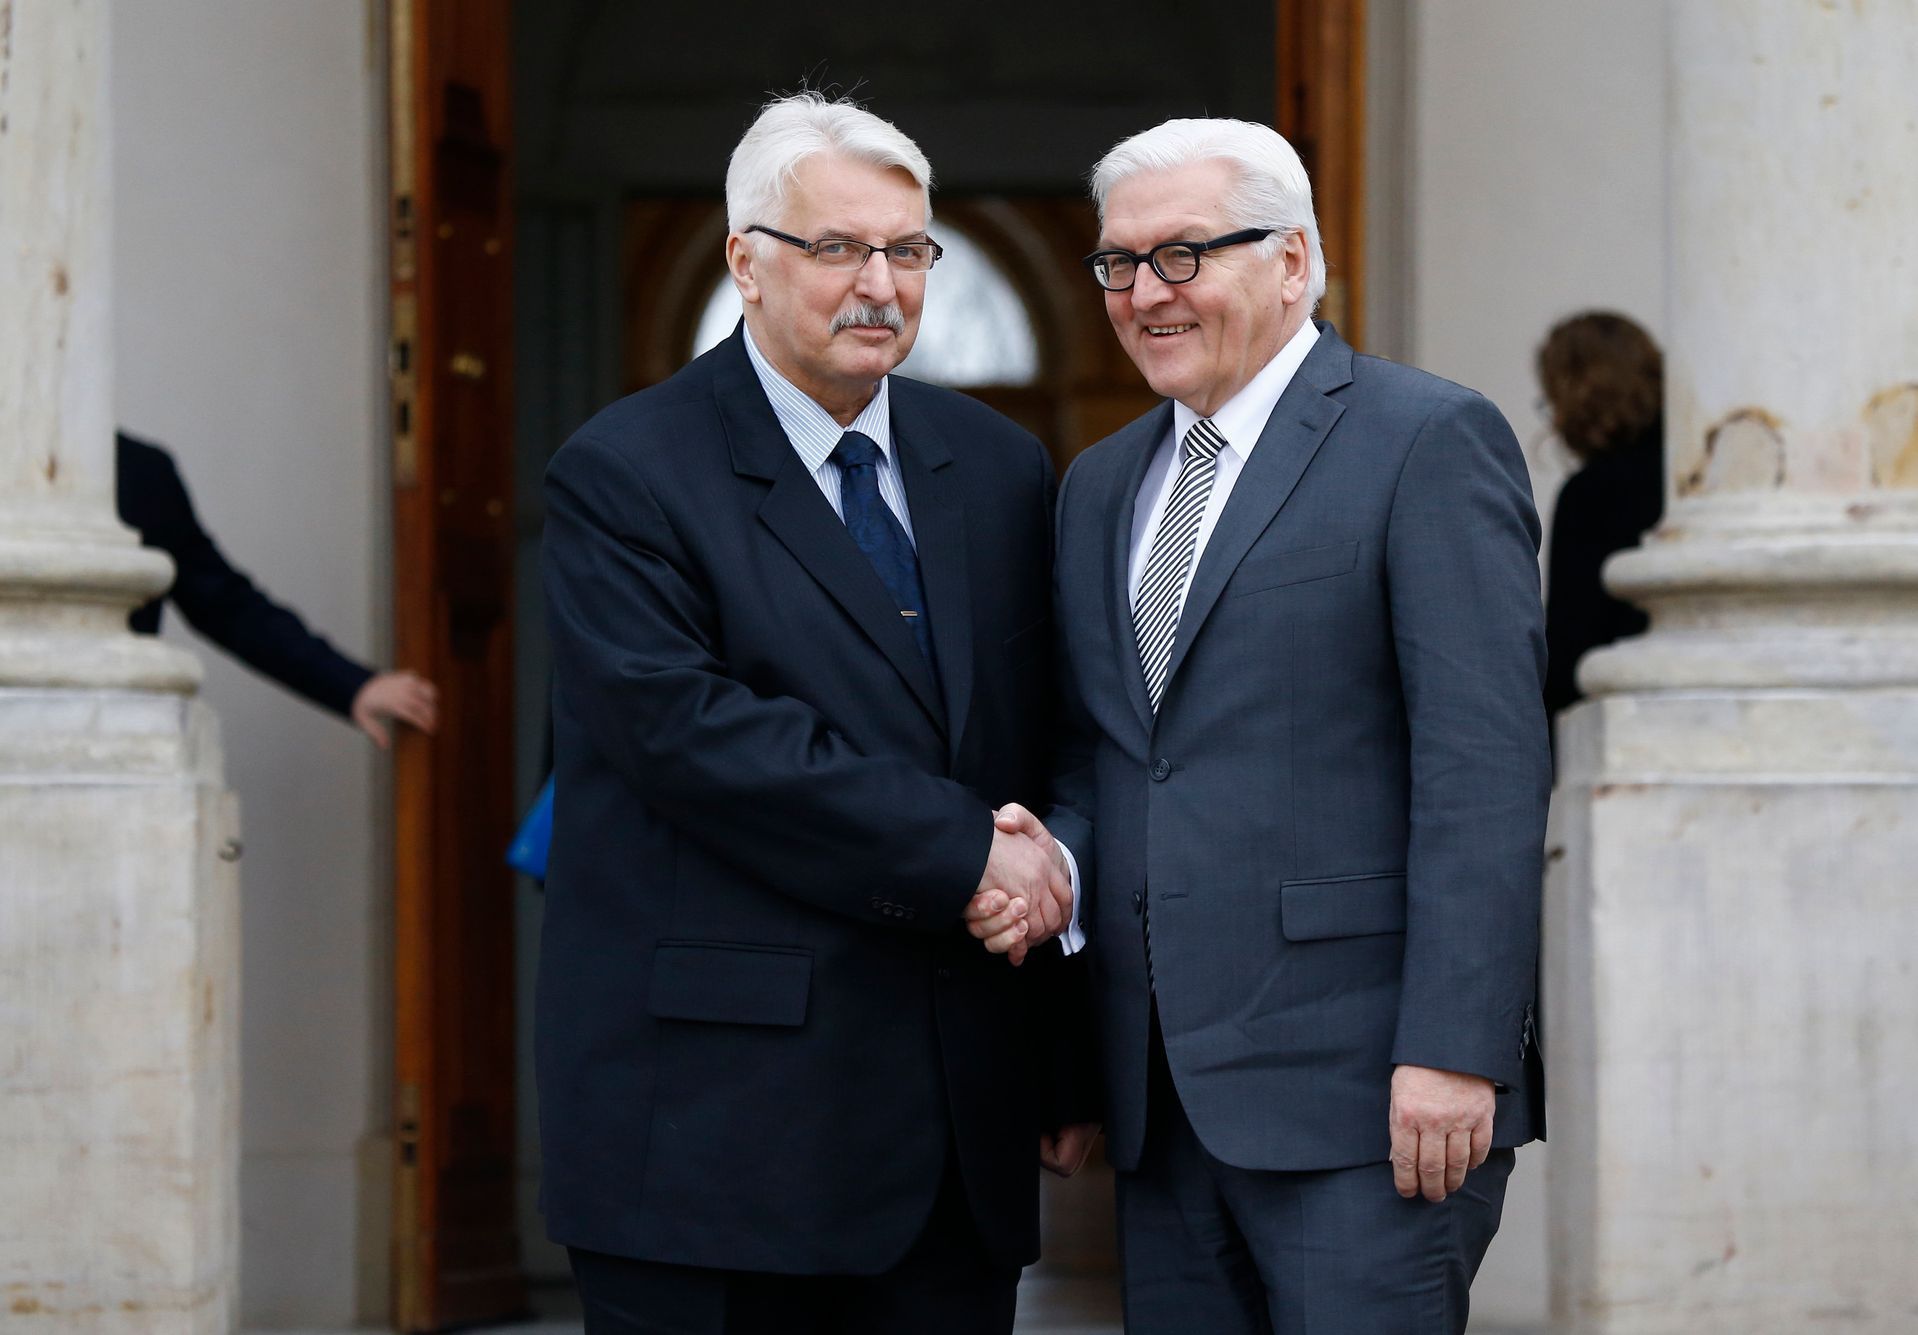 Polish Foreign Minister Waszczykowski shakes hands with his German counterpart Steinmeier at the Lazienki Palace in Warsaw